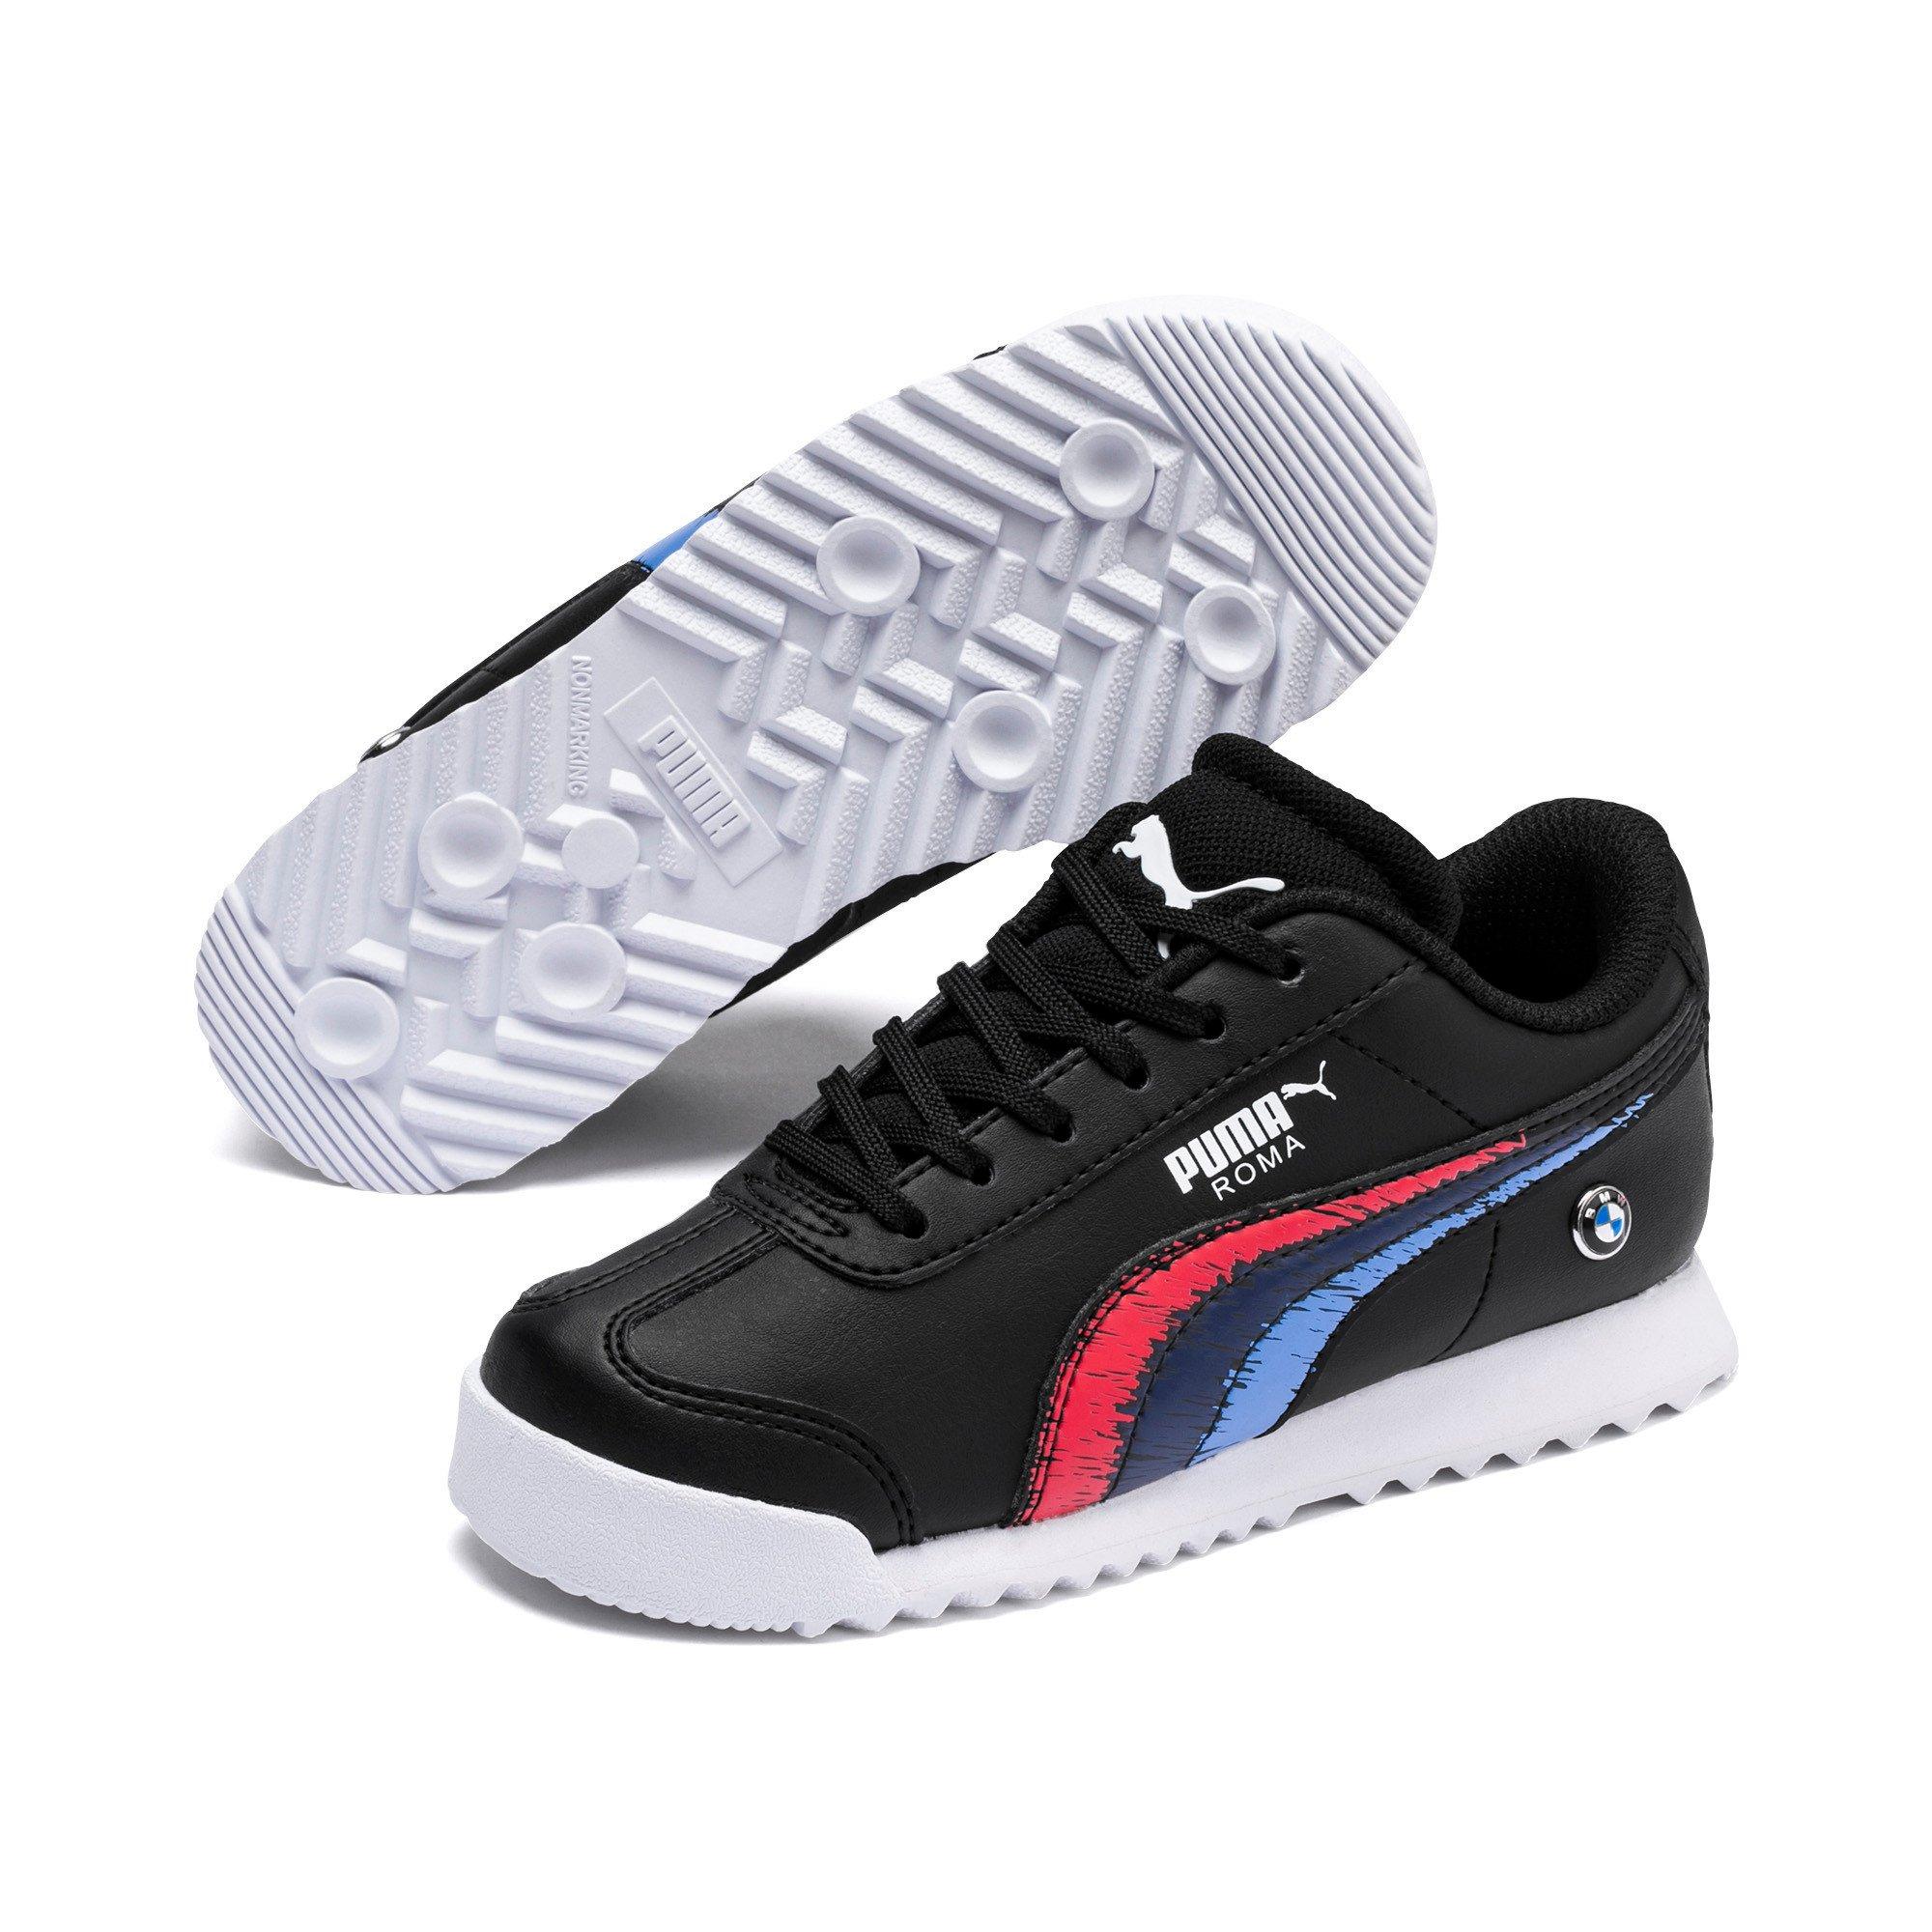 toddler puma shoes clearance